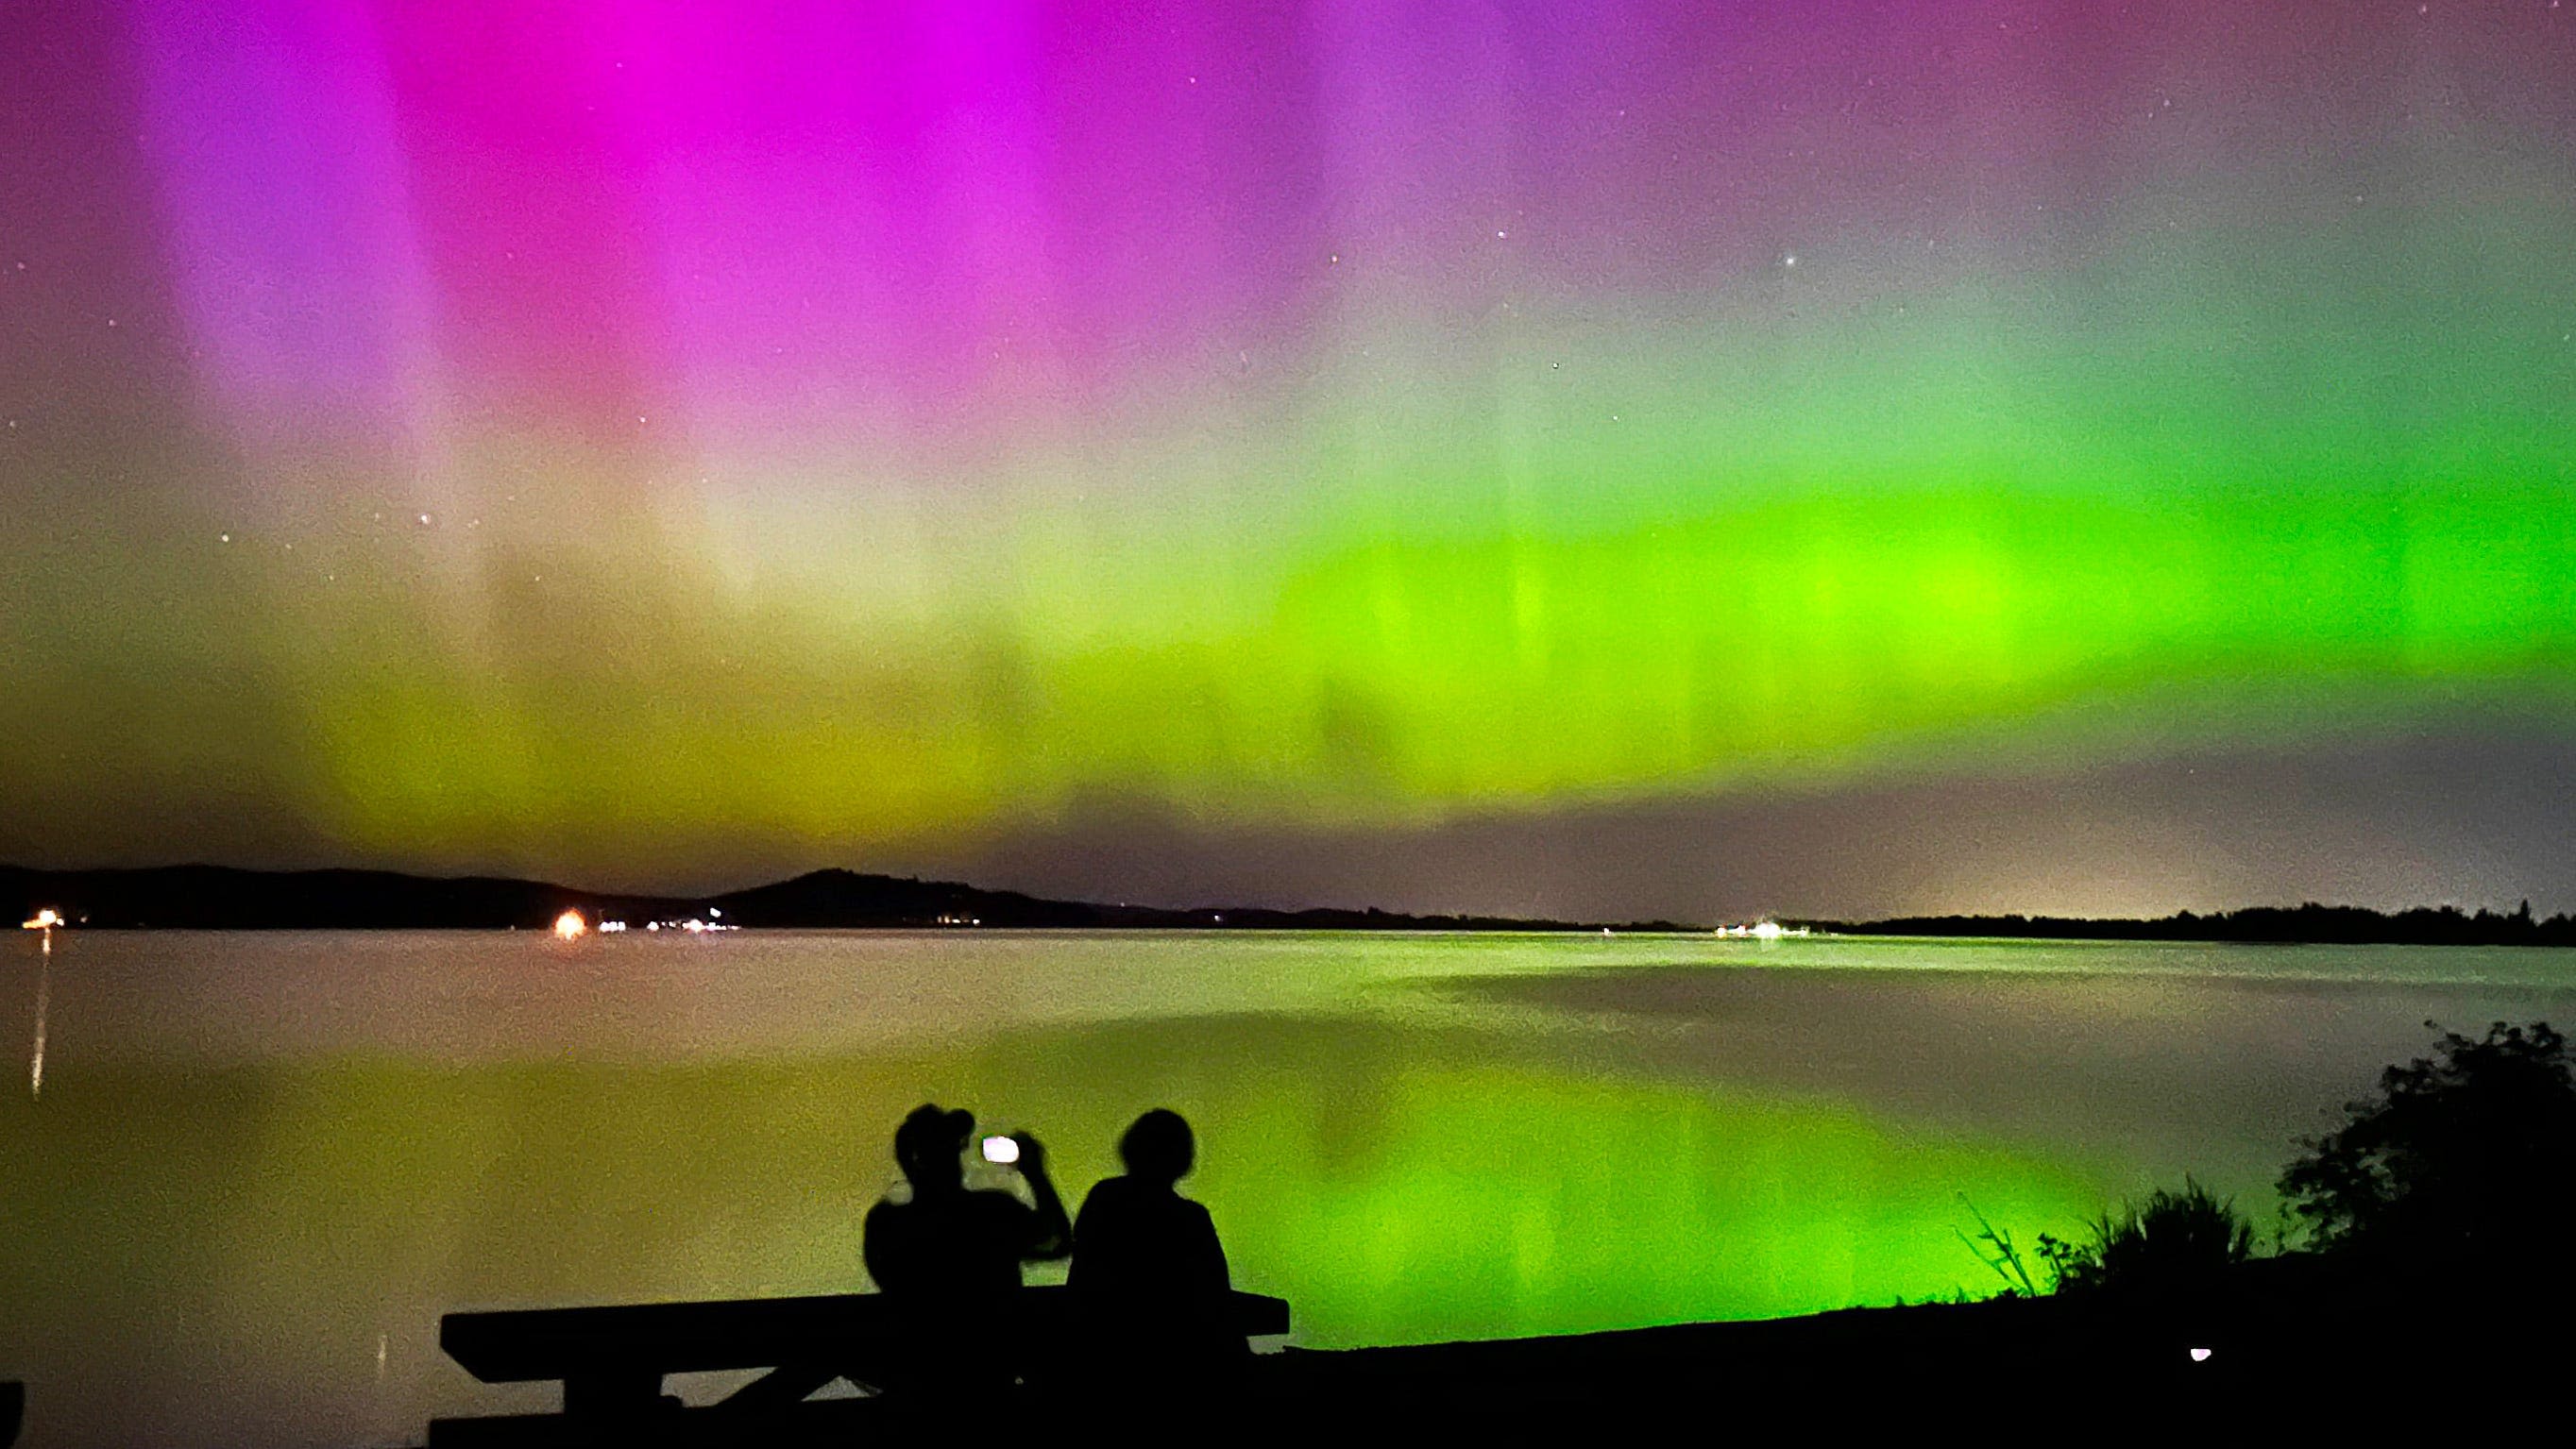 Will we see the northern lights again Sunday? Here's the forecast